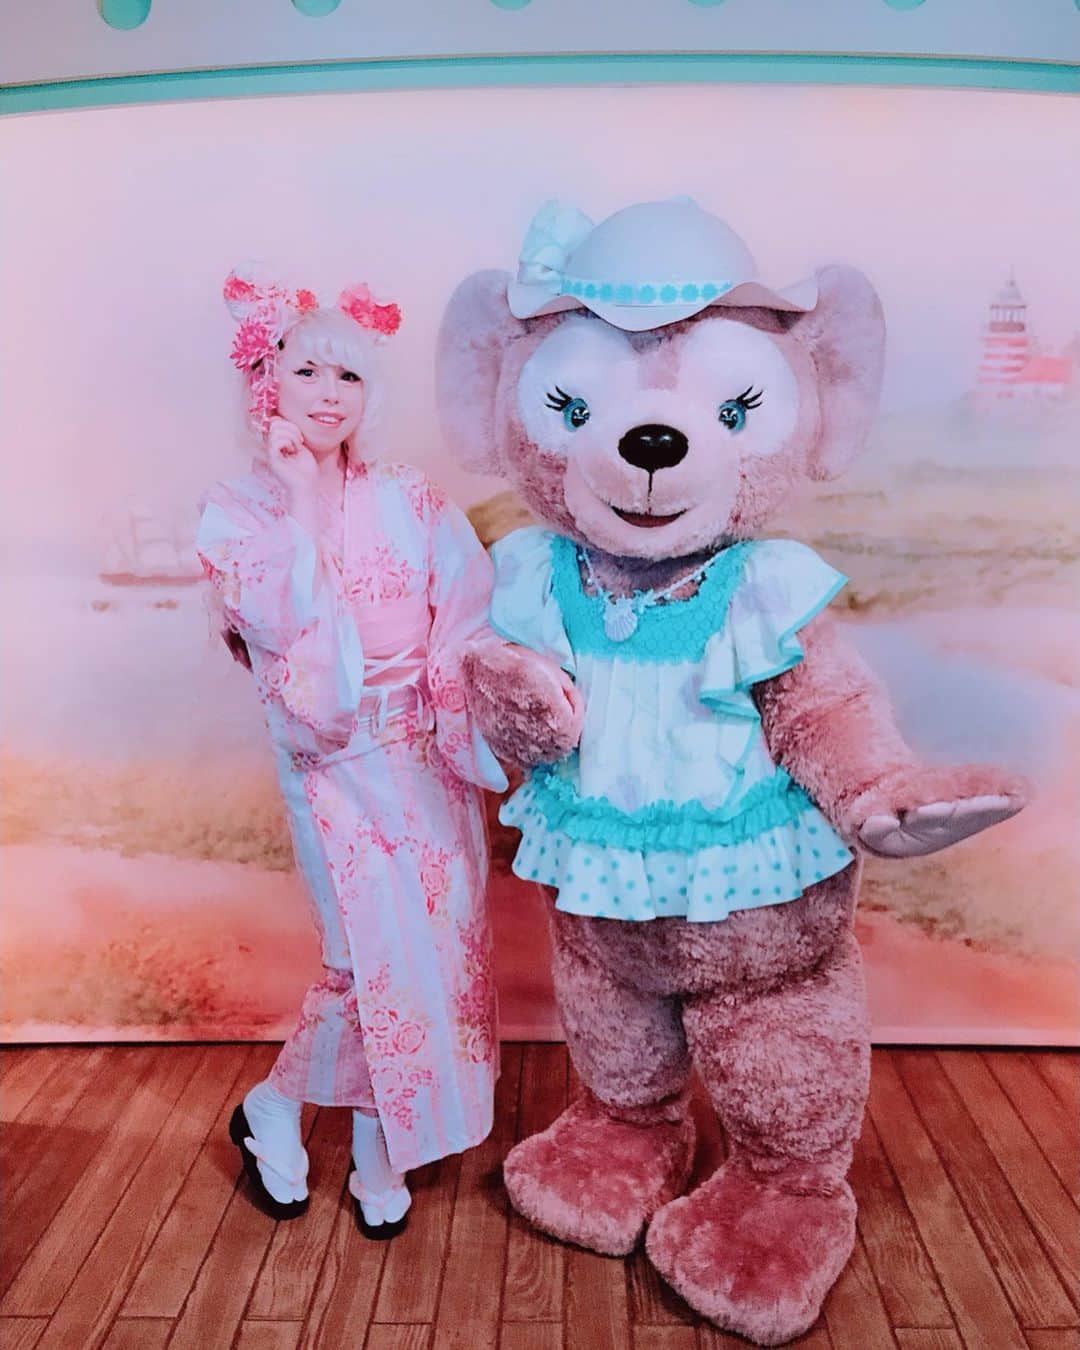 Elizabunnii エリザバニーのインスタグラム：「💖Bunnie in a rose yukata coord & Shellie May in a sunny fun outfit~!💕💖⁣ 🎀Wearing yukata is so fun~!💕 And I can put them on myself so I don’t need to go to kimono salon🙈 Going to kimono salon is so fun but it gets expensive ahah..💔💔 I don’t have much time left in Japan so I’m trying to wear yukata as much as possible before I have to go home~!💘💞💕⁣ #yukata #yukata👘 #tokyodisneysea #shelliemay #duffysunnyfun #disneysea #disneygram #disney #mickeyears #yukatagirl #浴衣 #浴衣帯アレンジ #浴衣コーデ #浴衣アレンジ #シェリーメイ #ディズニー好き #ディズニー #ディズニーシー #ディズニーコーデ」